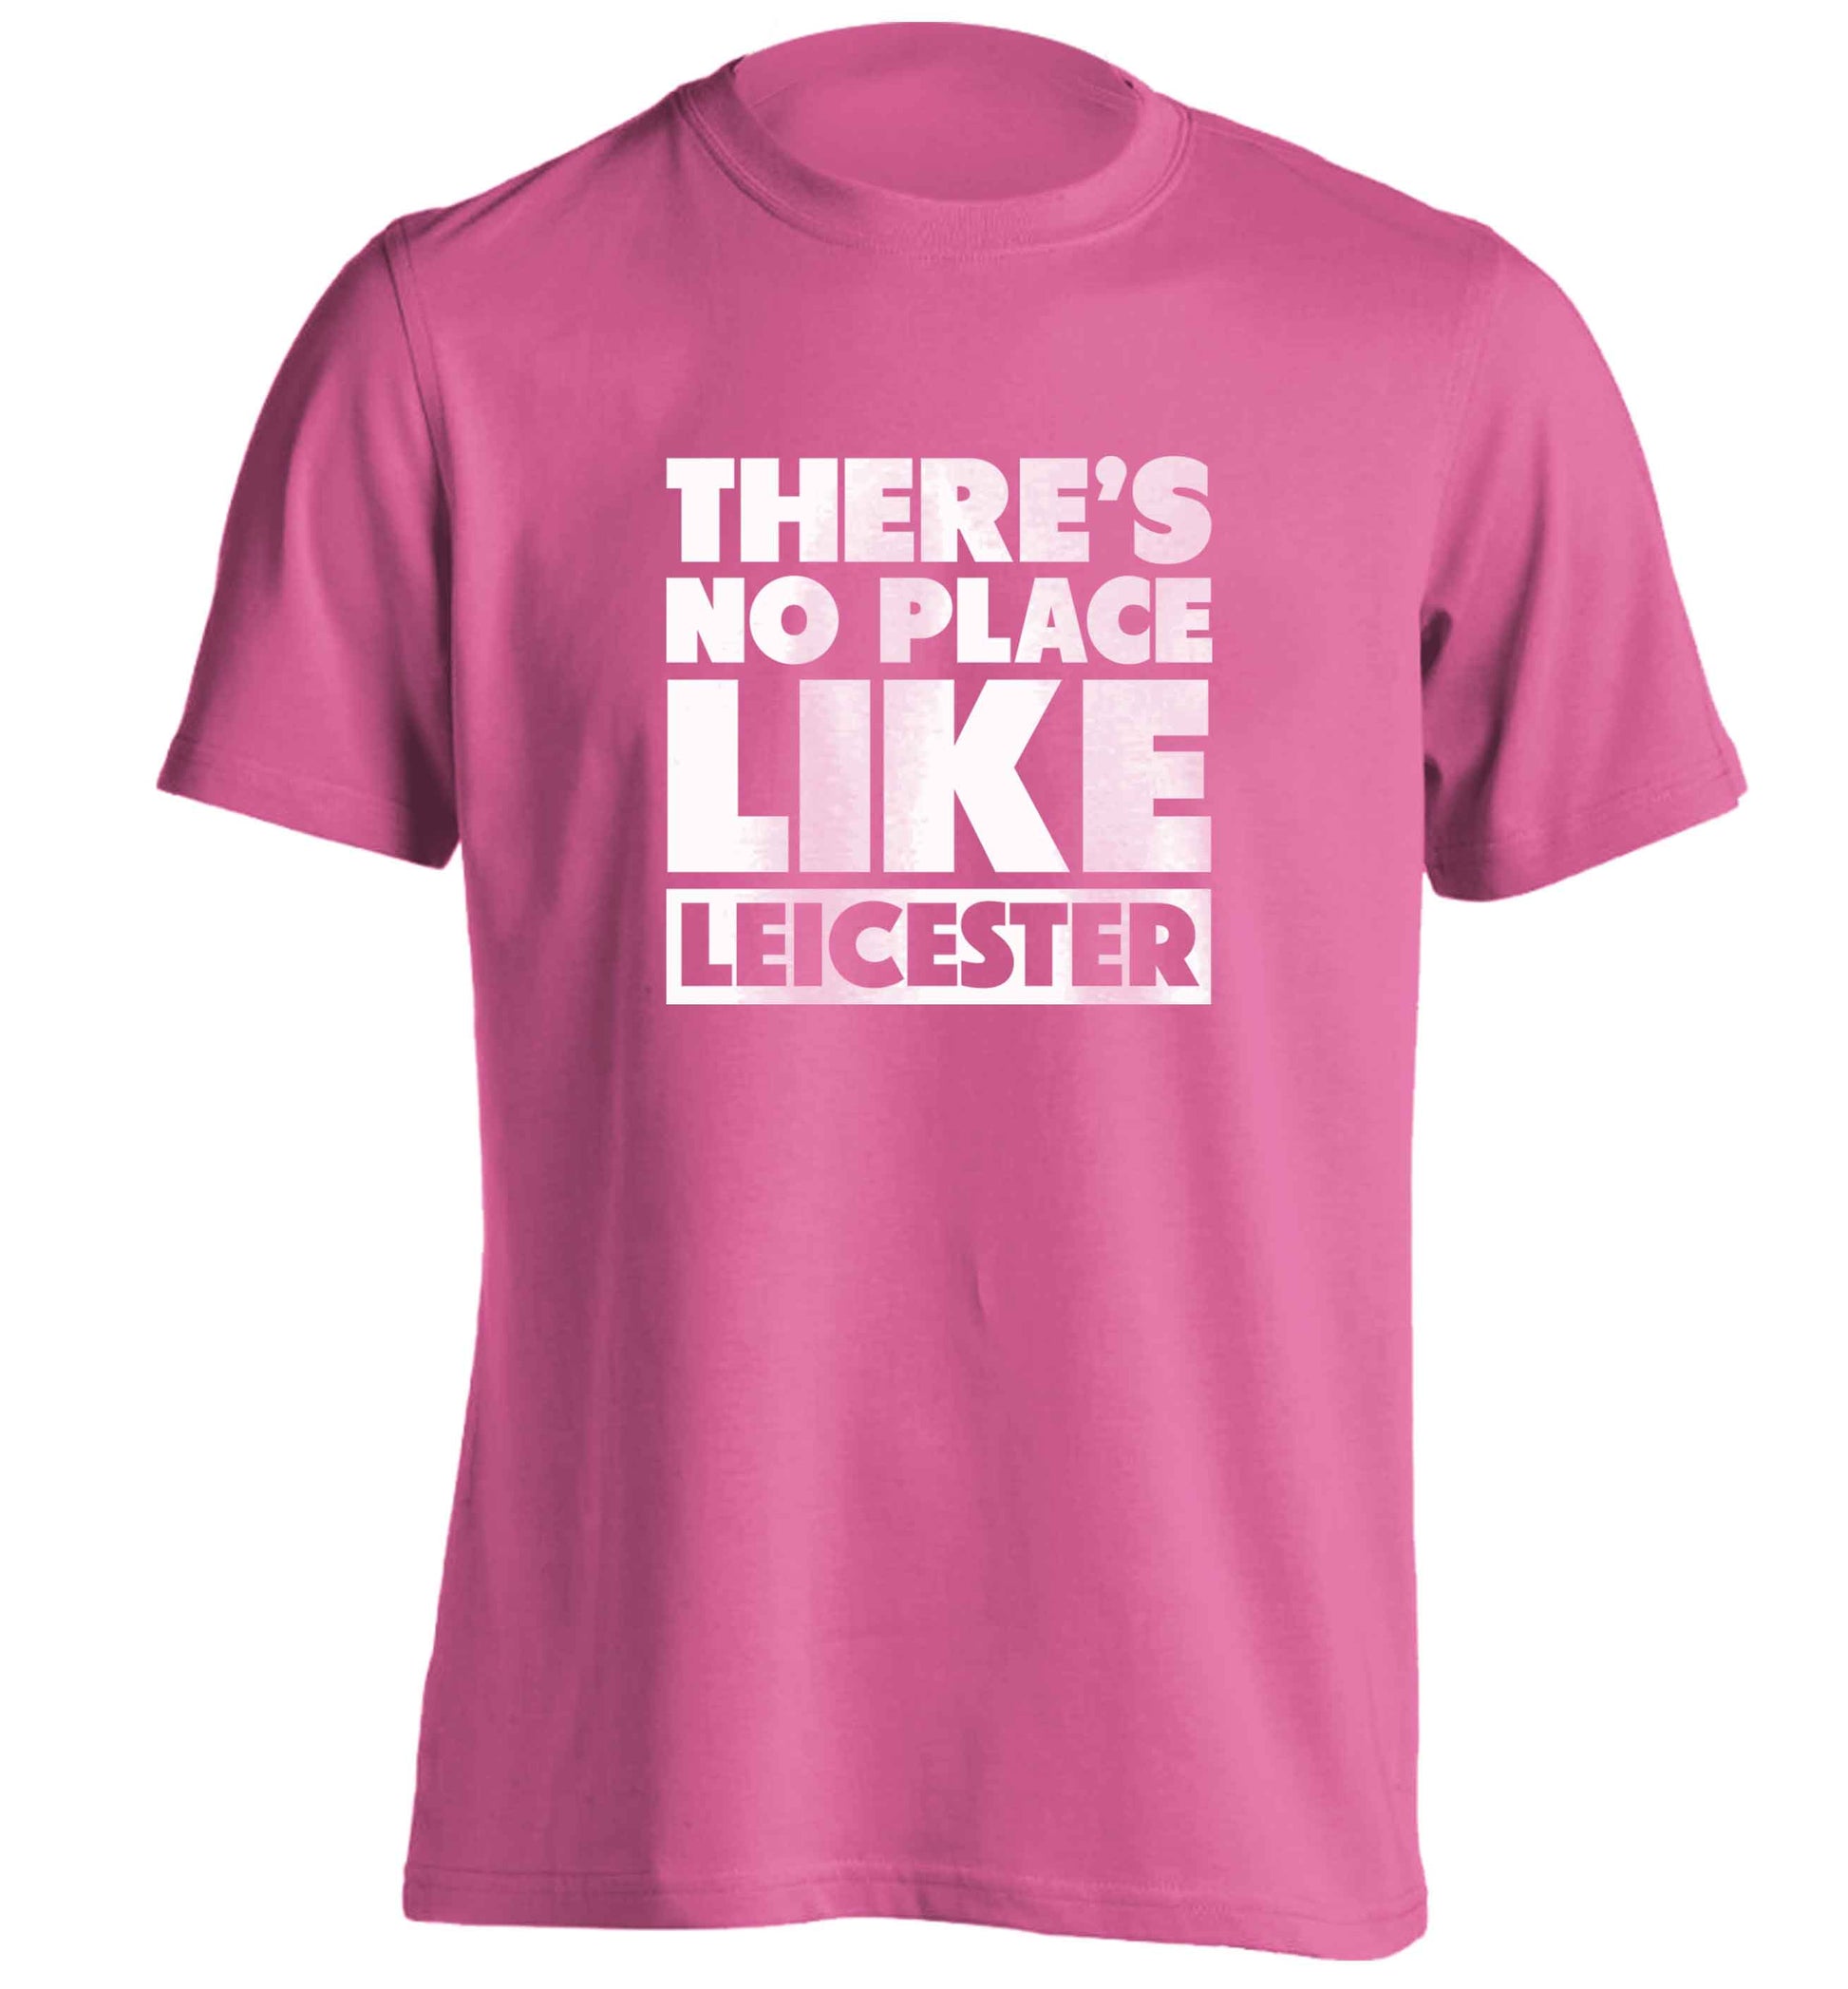 There's no place like Leicester adults unisex pink Tshirt 2XL